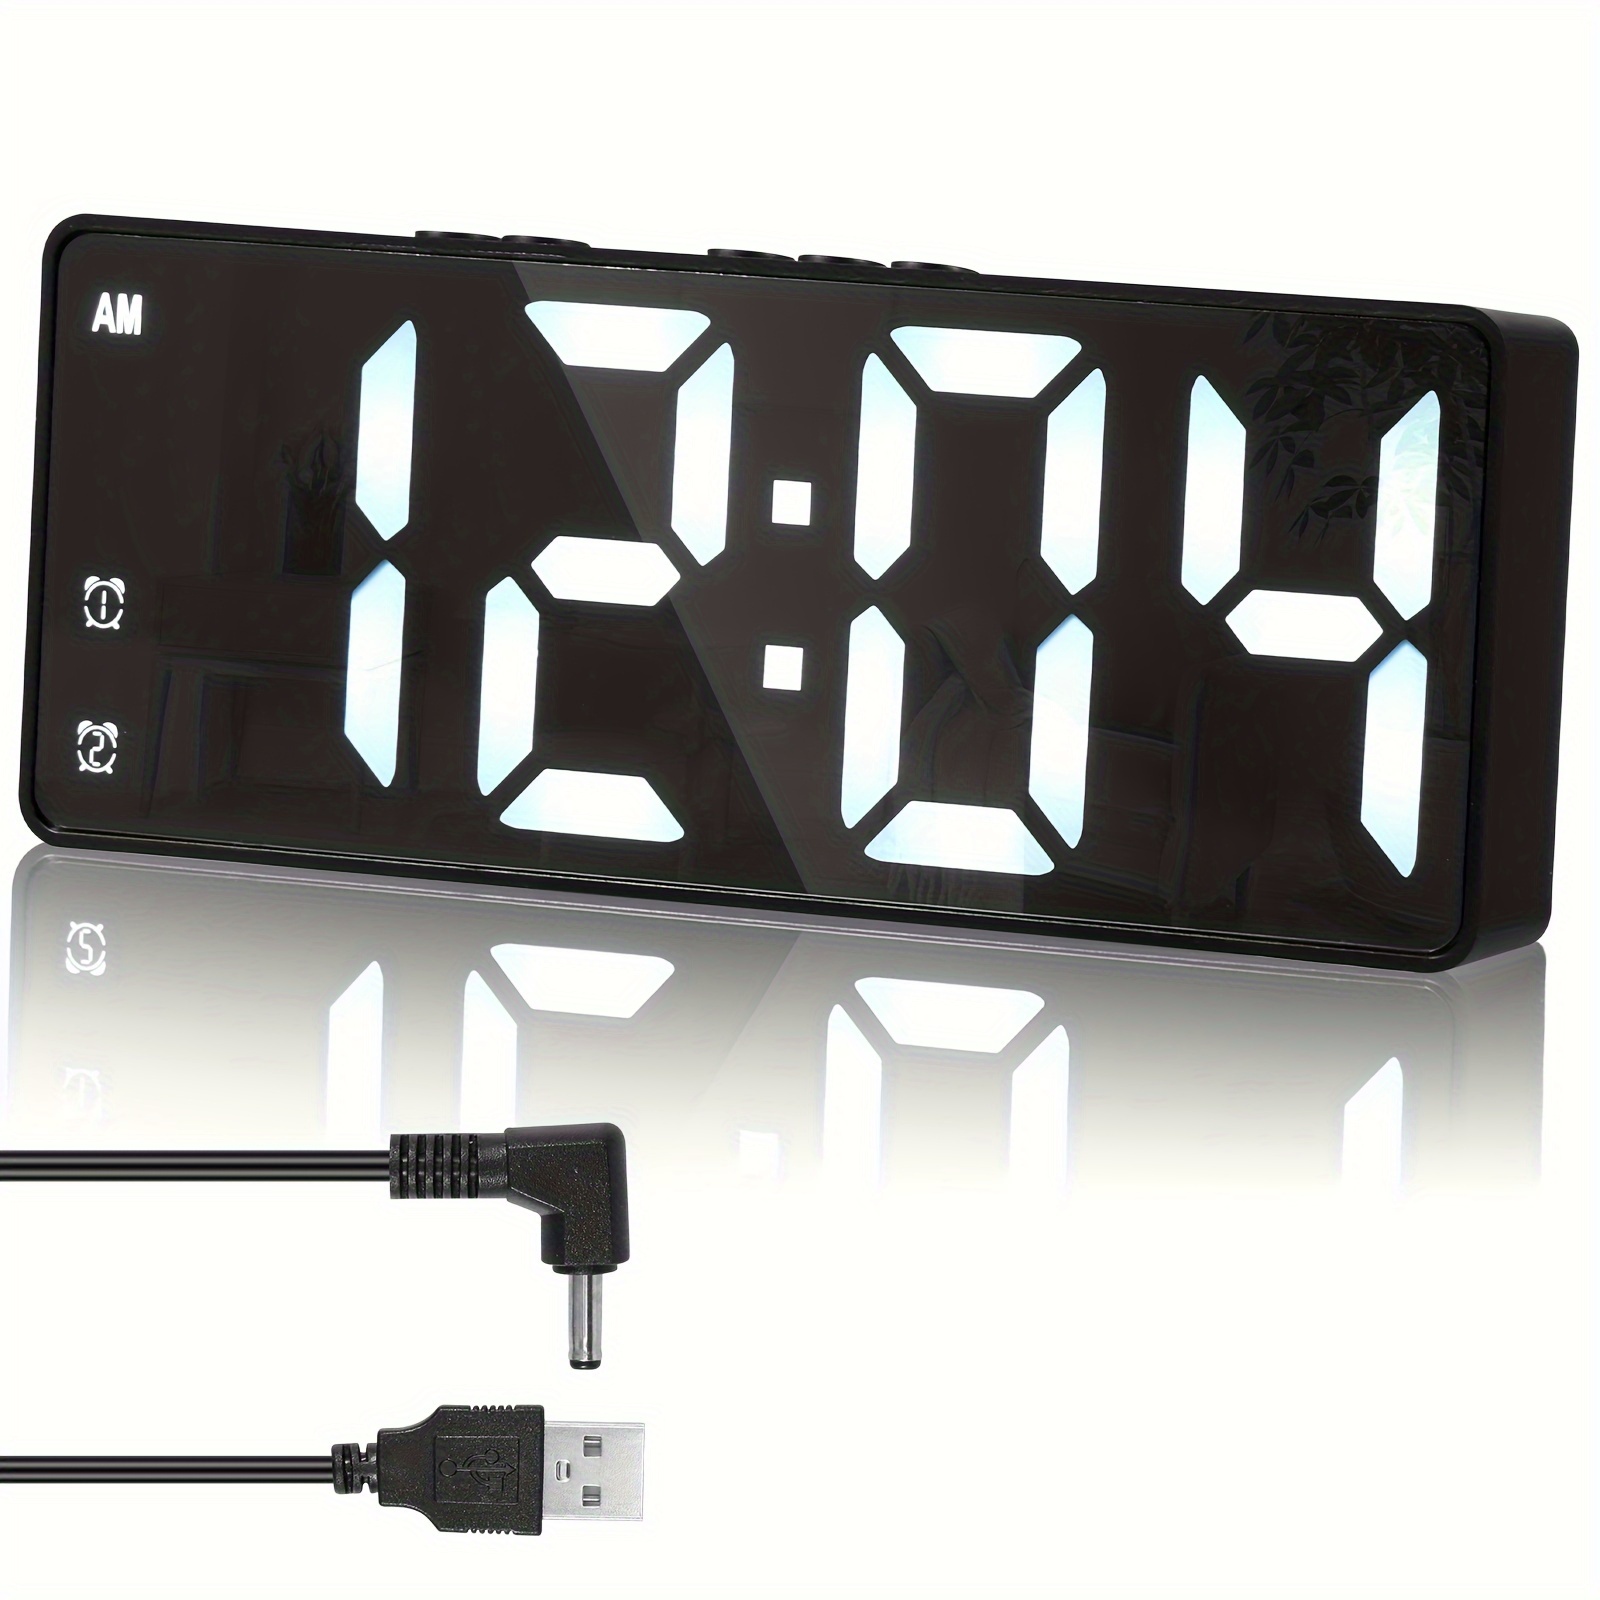 

Digital Alarm Clock Colorful Led Alarm Clock Usb/battery Operated Desk Clock With Dual Alarms 12/24h Display 3 Adjustable Brightness Voice Control Snooze Function For Home Office